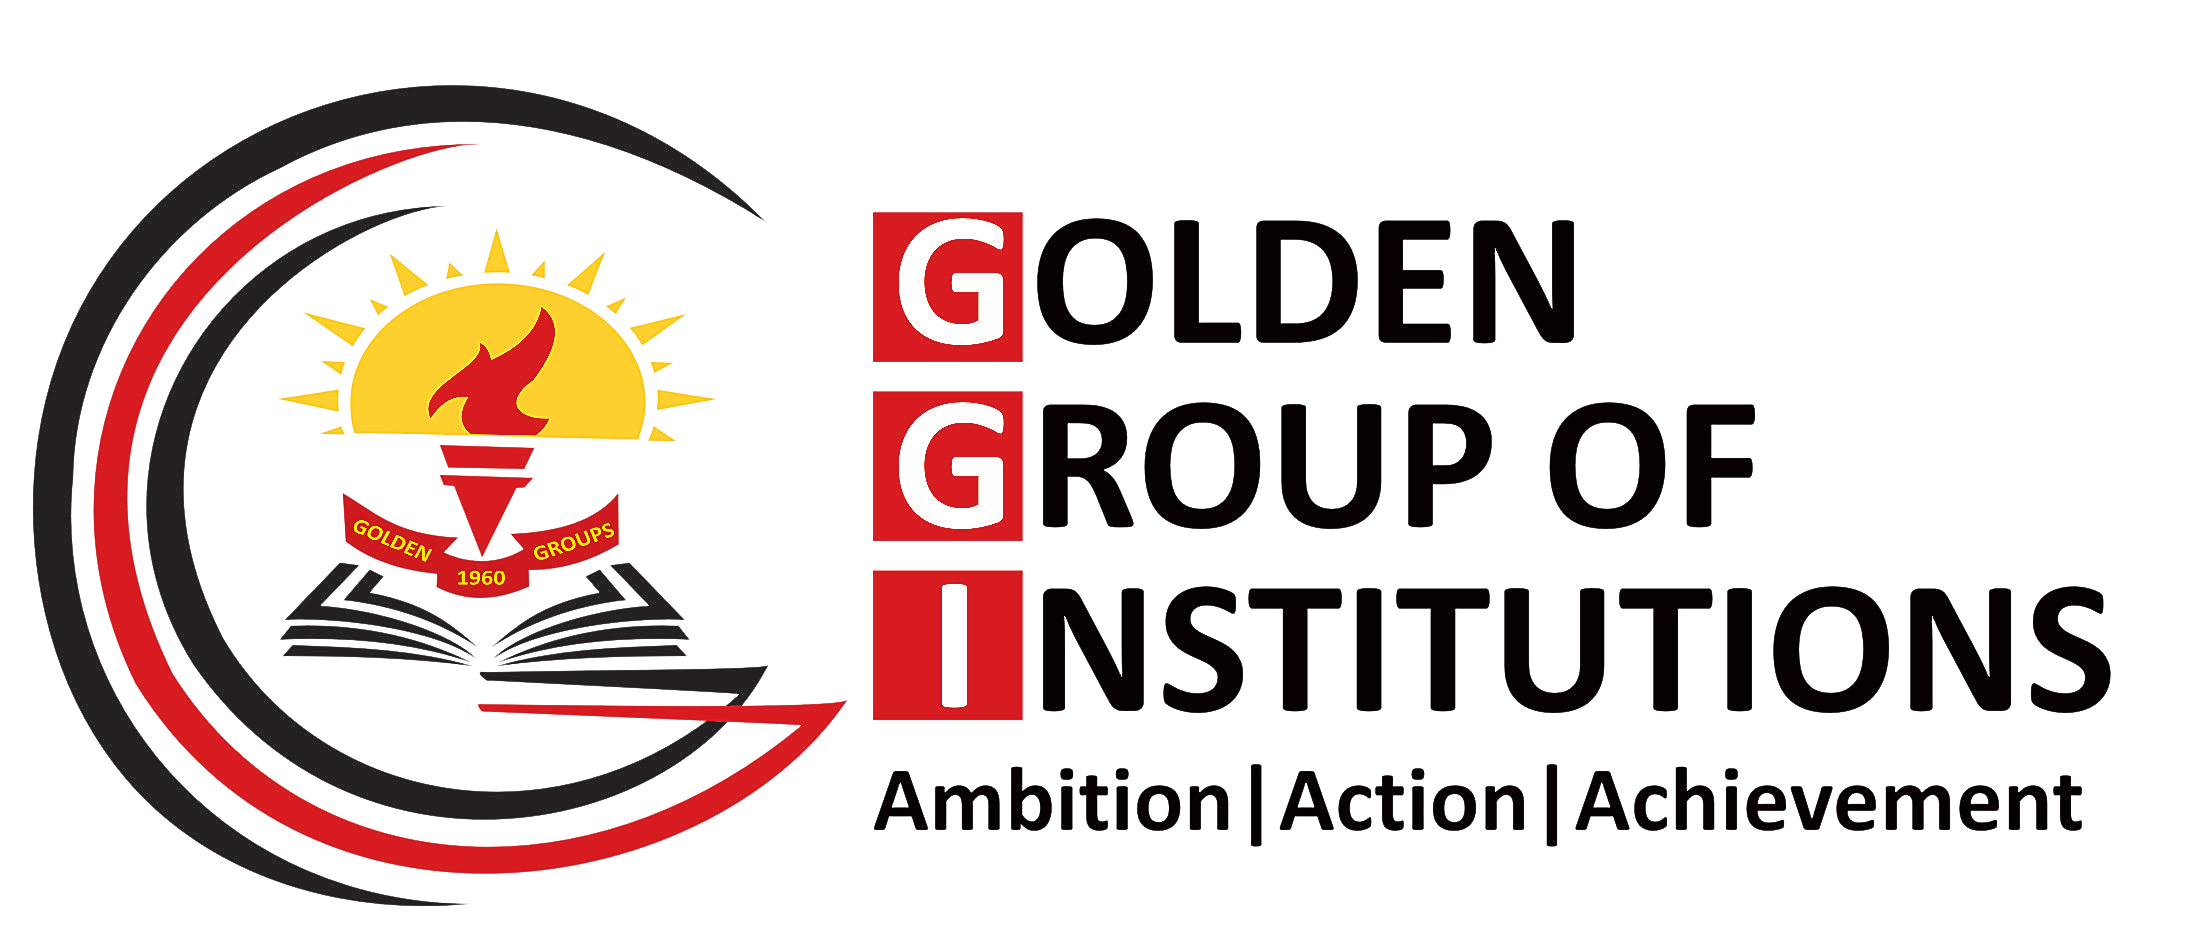 Golden Group of Institutions